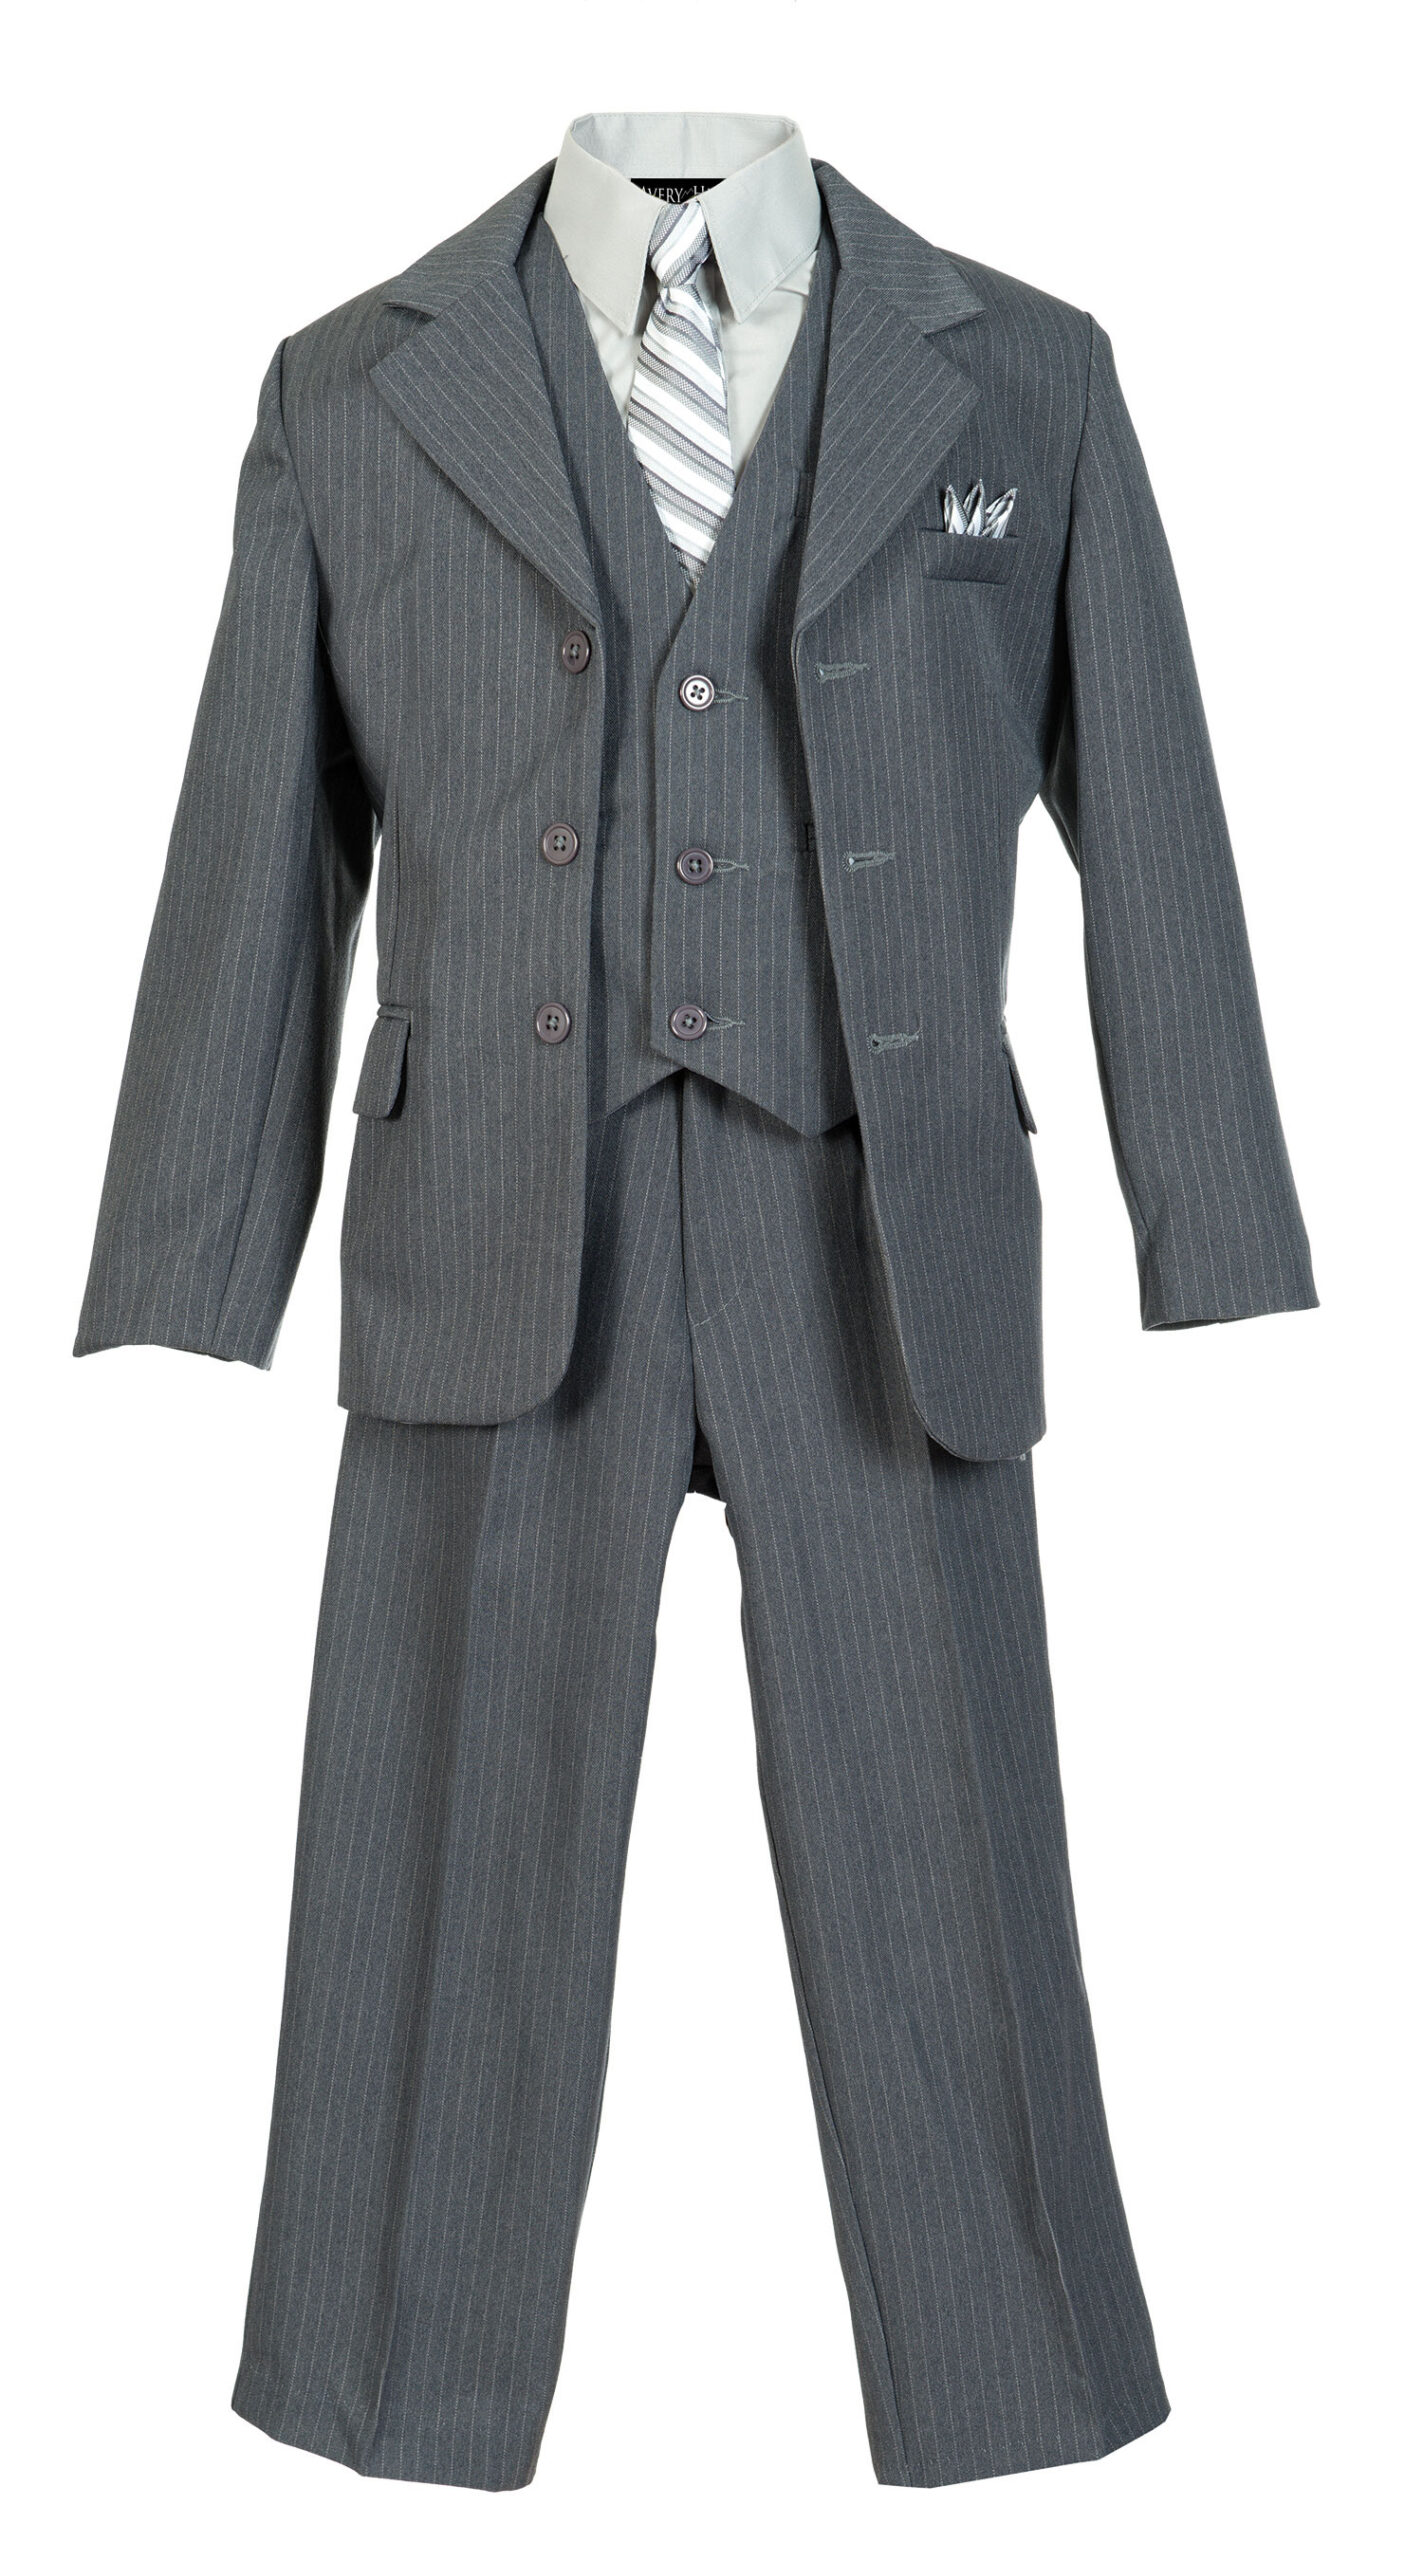 Boys Pinstripe Suit Set with Matching Tie LTGY 10